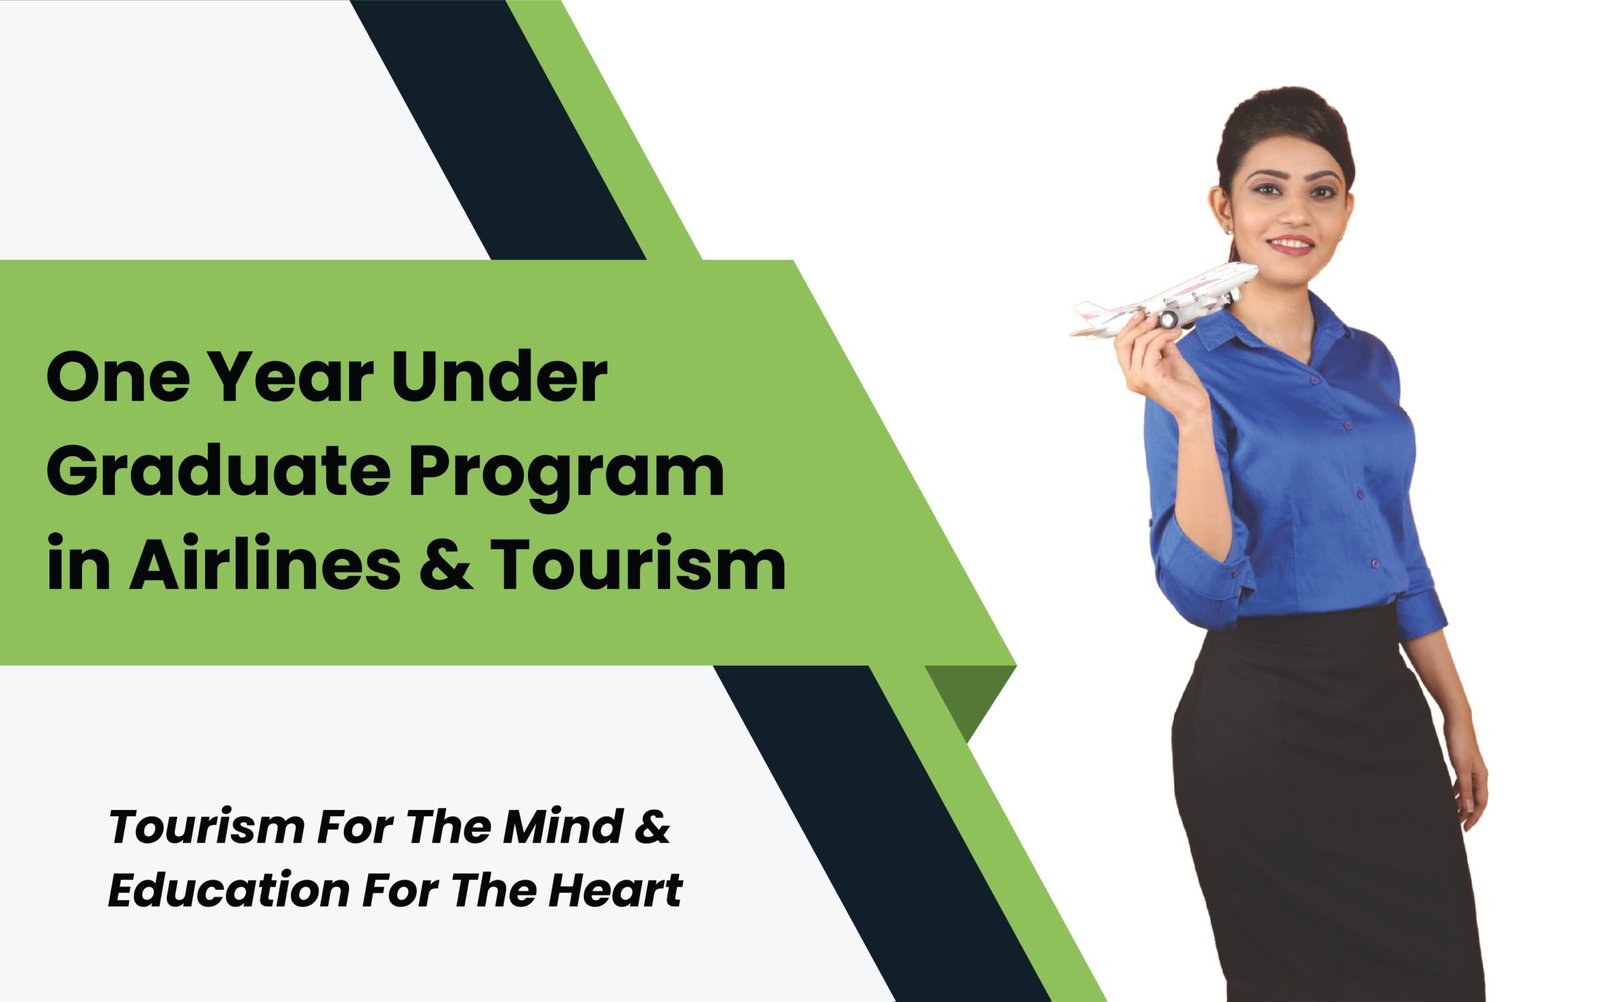 One Year Under Graduate Program In Airlines & Tourism